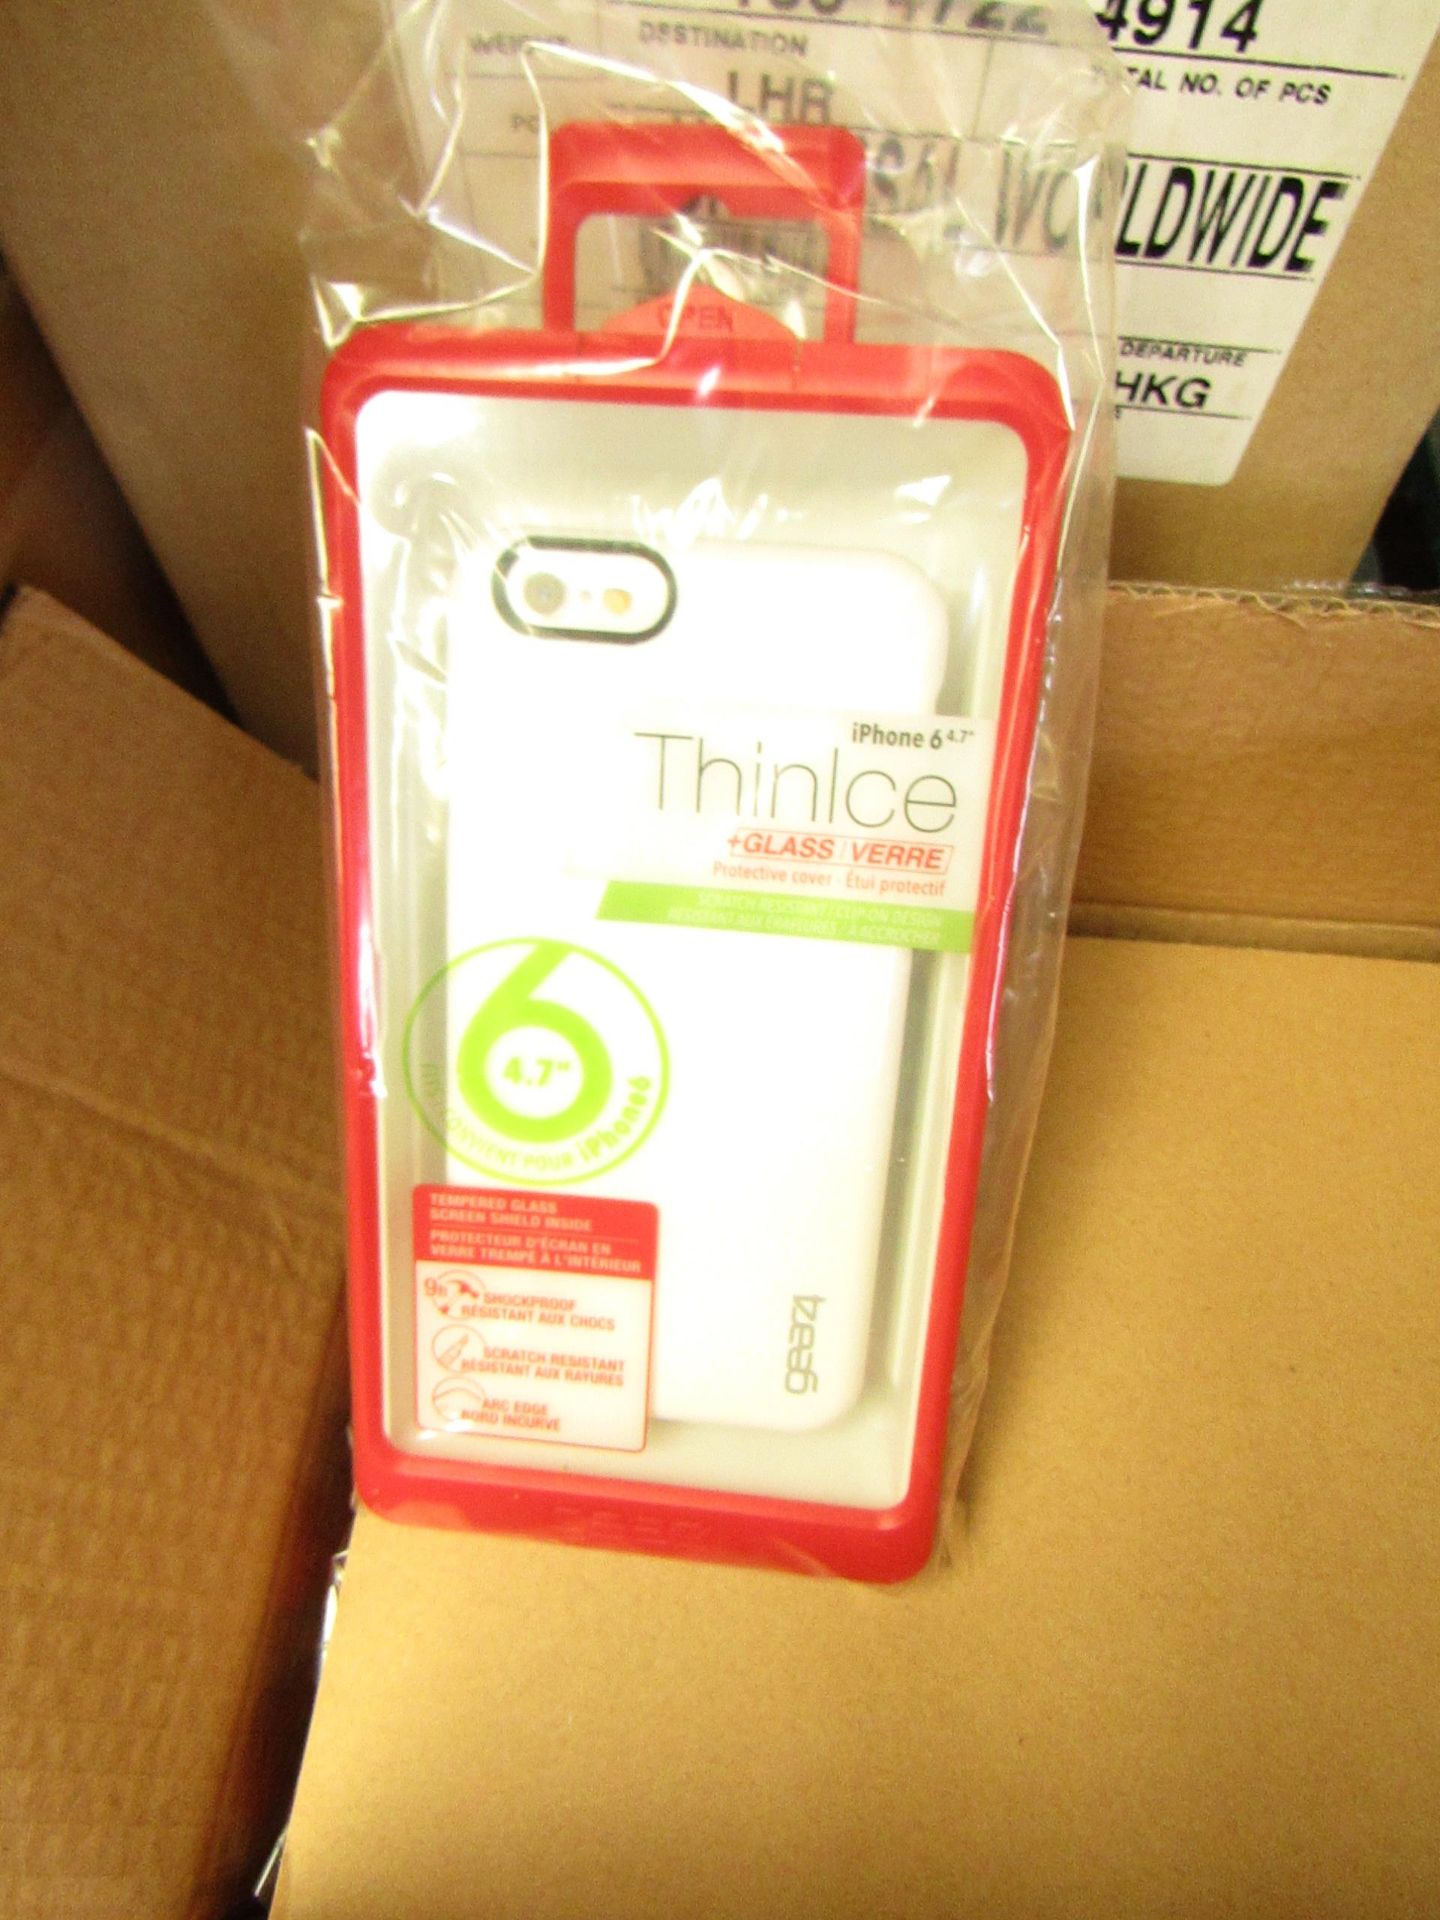 12x Gear4 - Thin Ice Iphone 6 Case's - All Packaged & Boxeed.